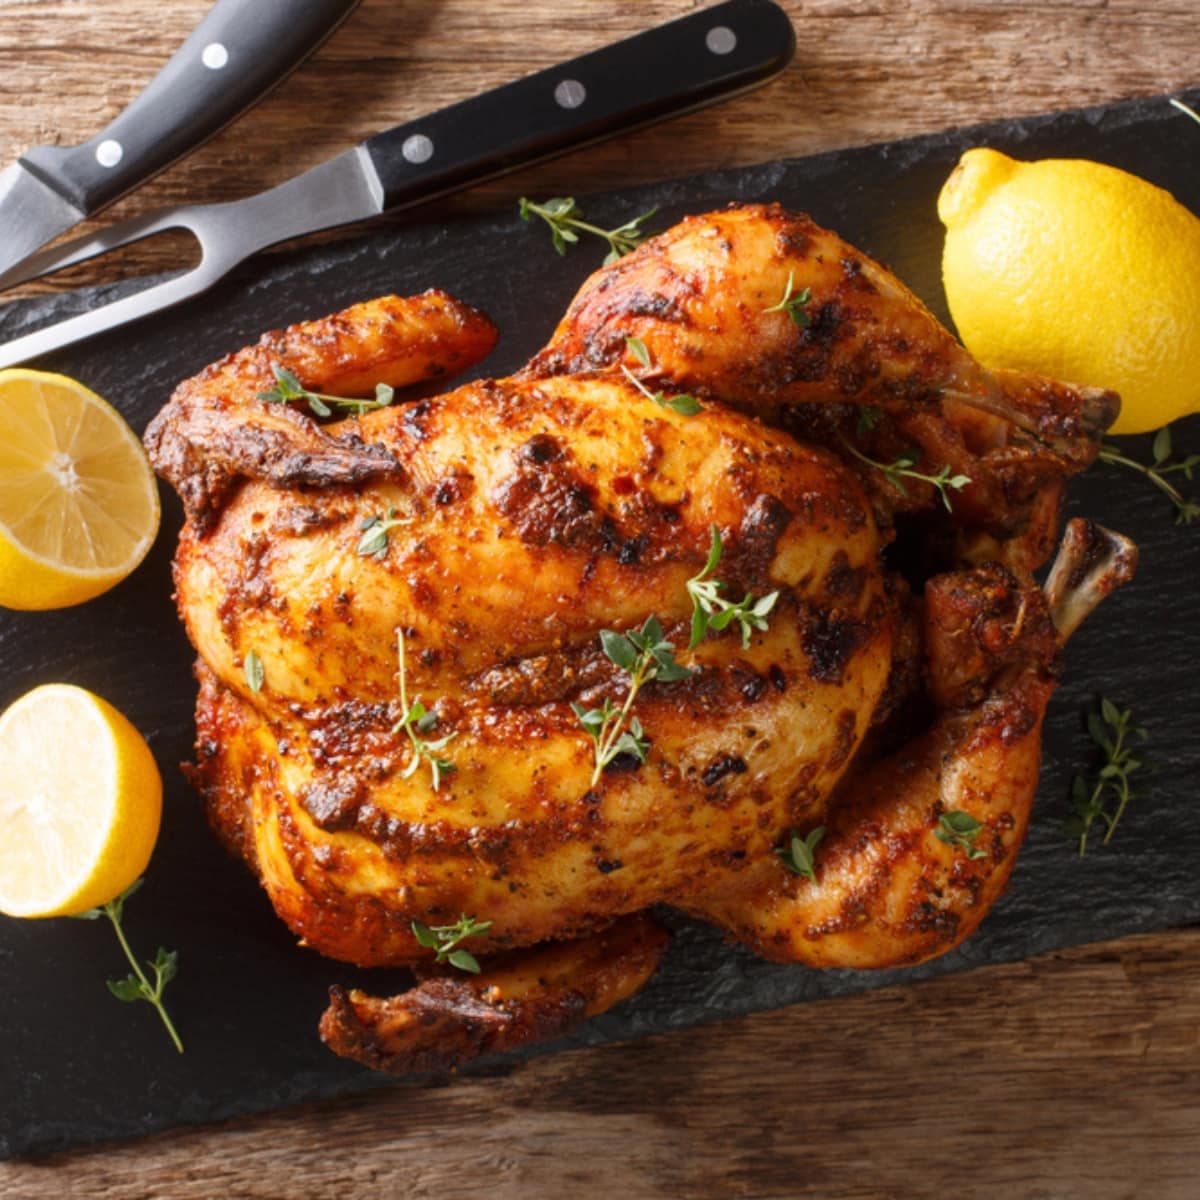 Whole Broiled Chicken With Fresh Lemons, Herbs and Spices
